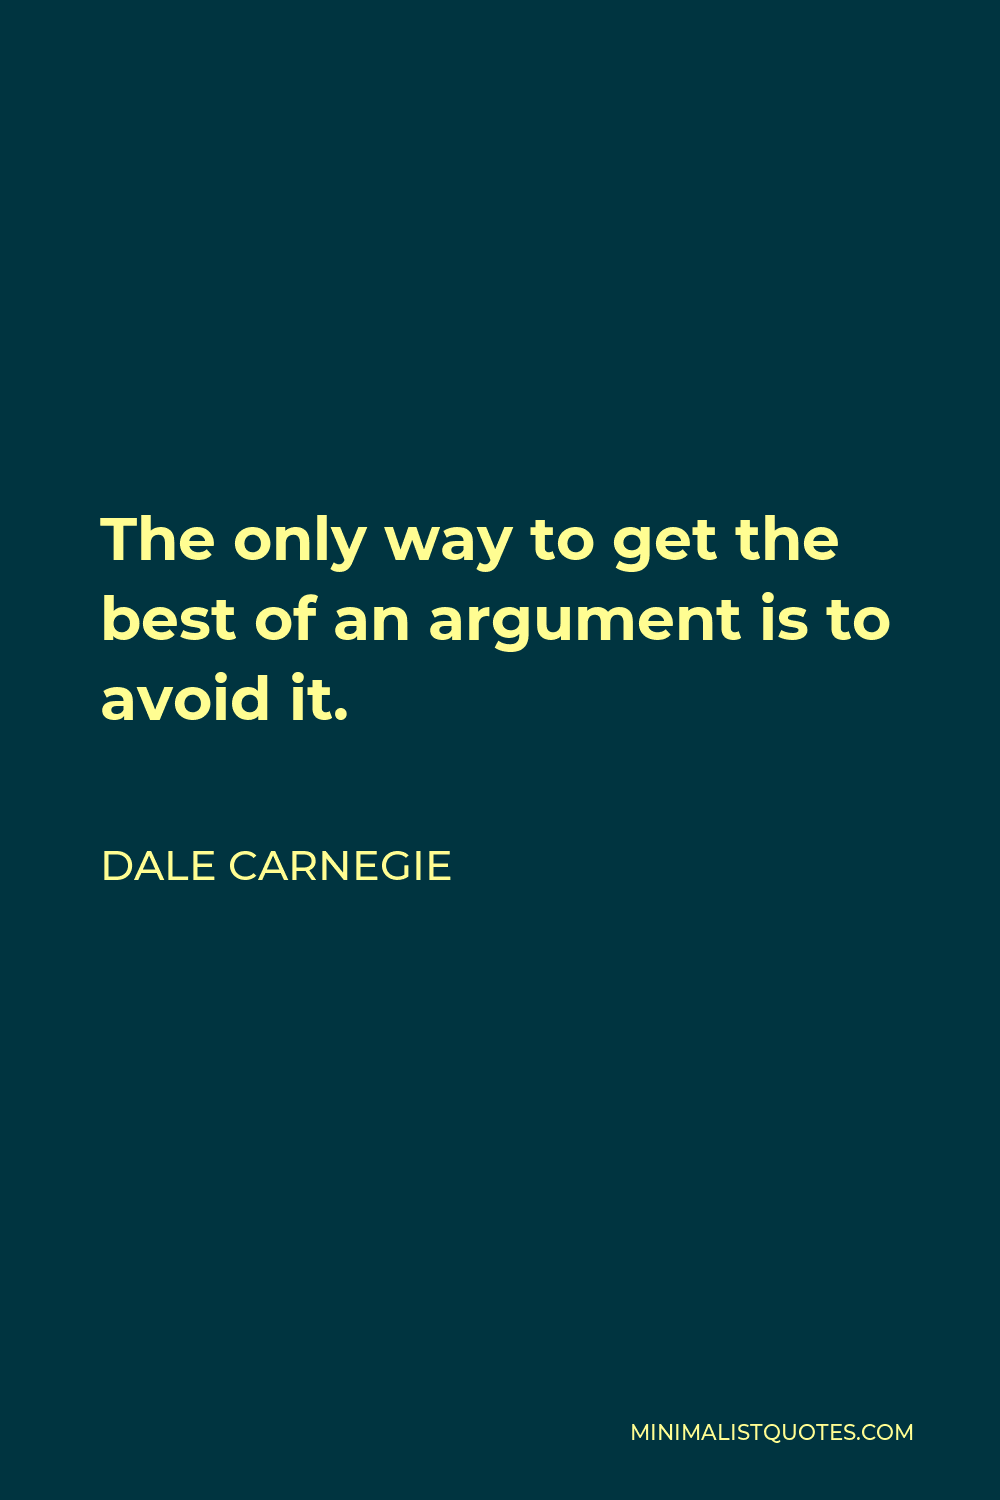 Dale Carnegie Quote - The only way to get the best of an argument is to avoid it.